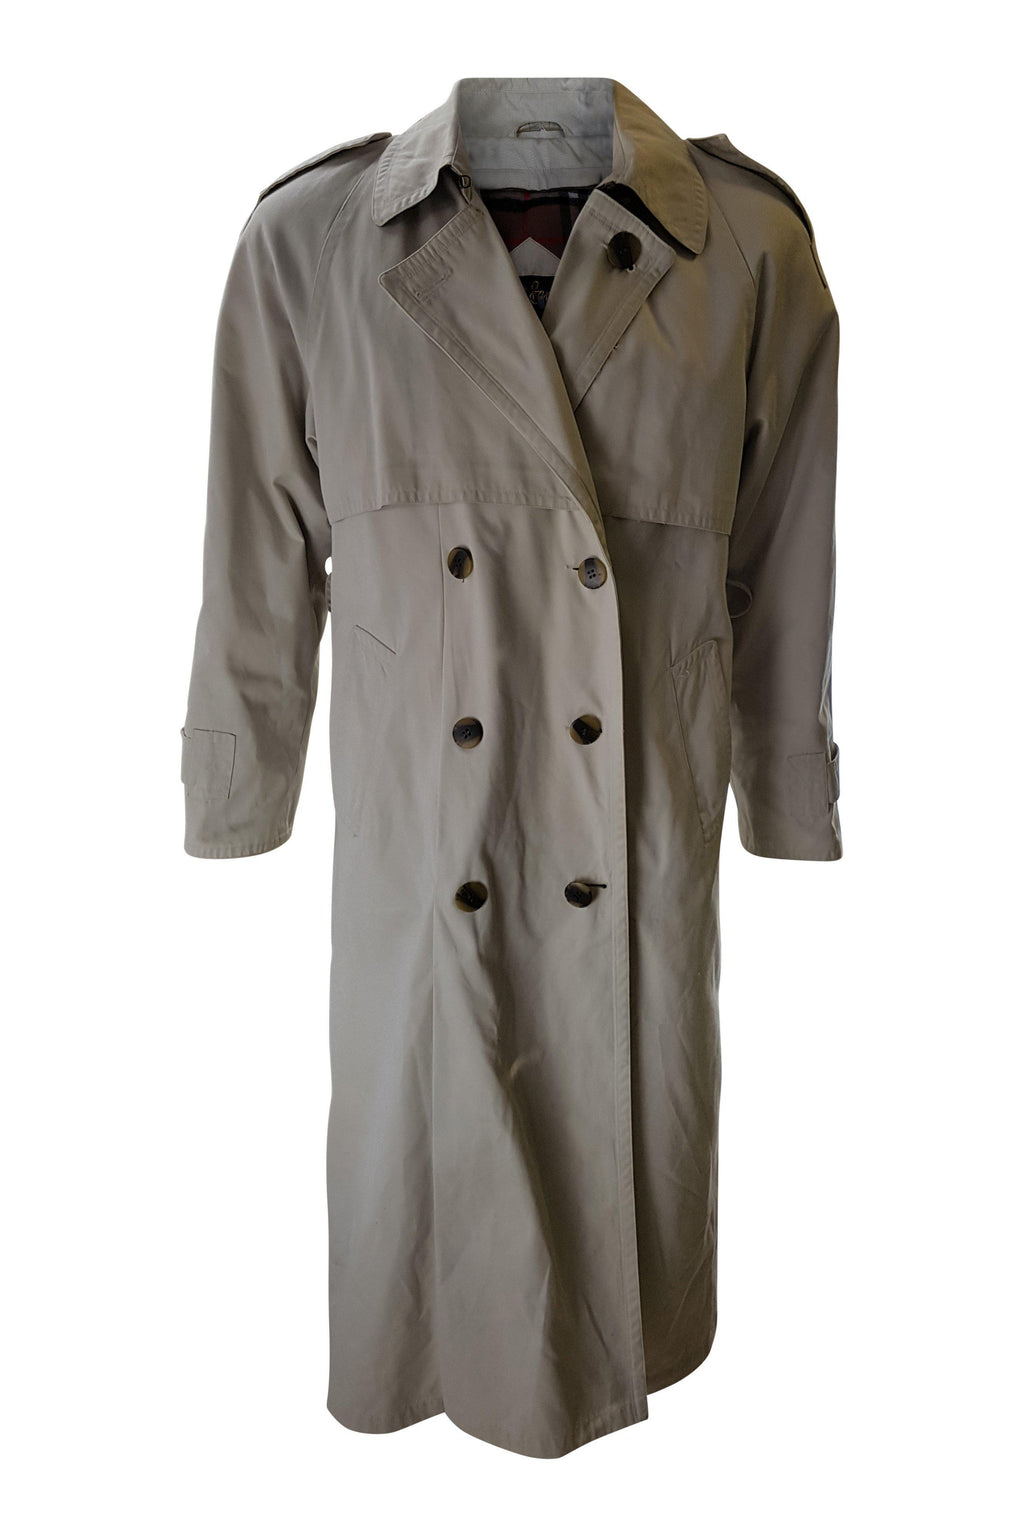 DAVID BARRY Vintage Classic Cream Double Breasted Trench Coat (10)-David Barry-The Freperie